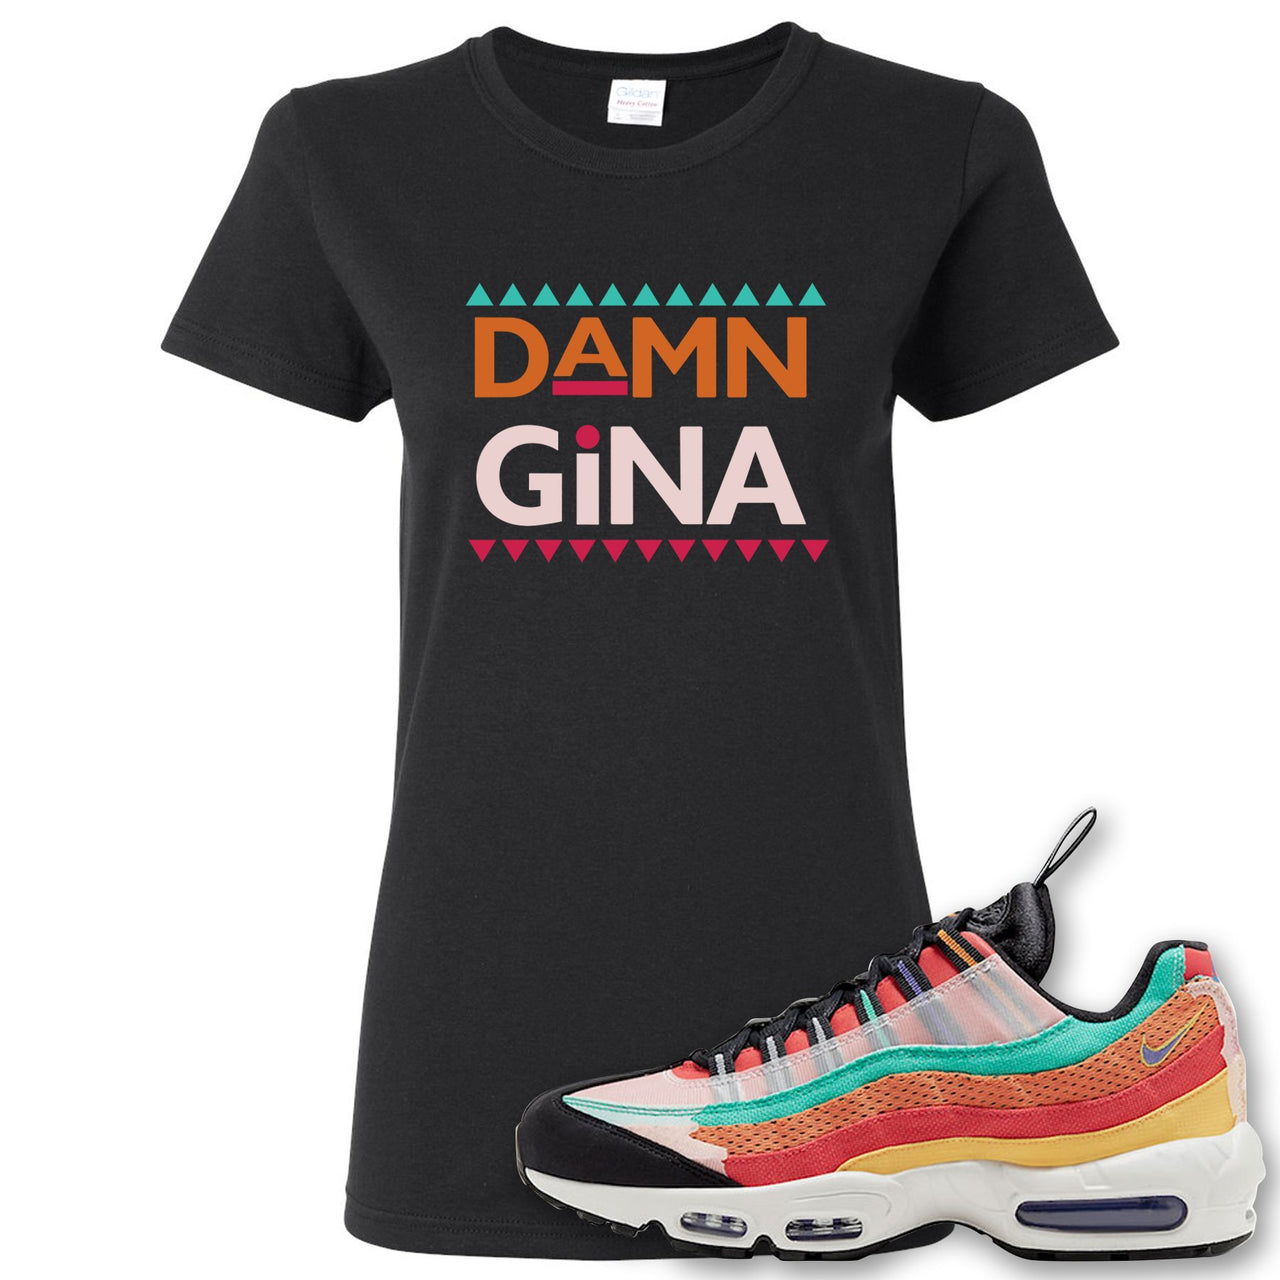 Air Max 95 Black History Month Sneaker Black Women's T Shirt | Women's Tees to match Nike Air Max 95 Black History Month Shoes | Damn Gina